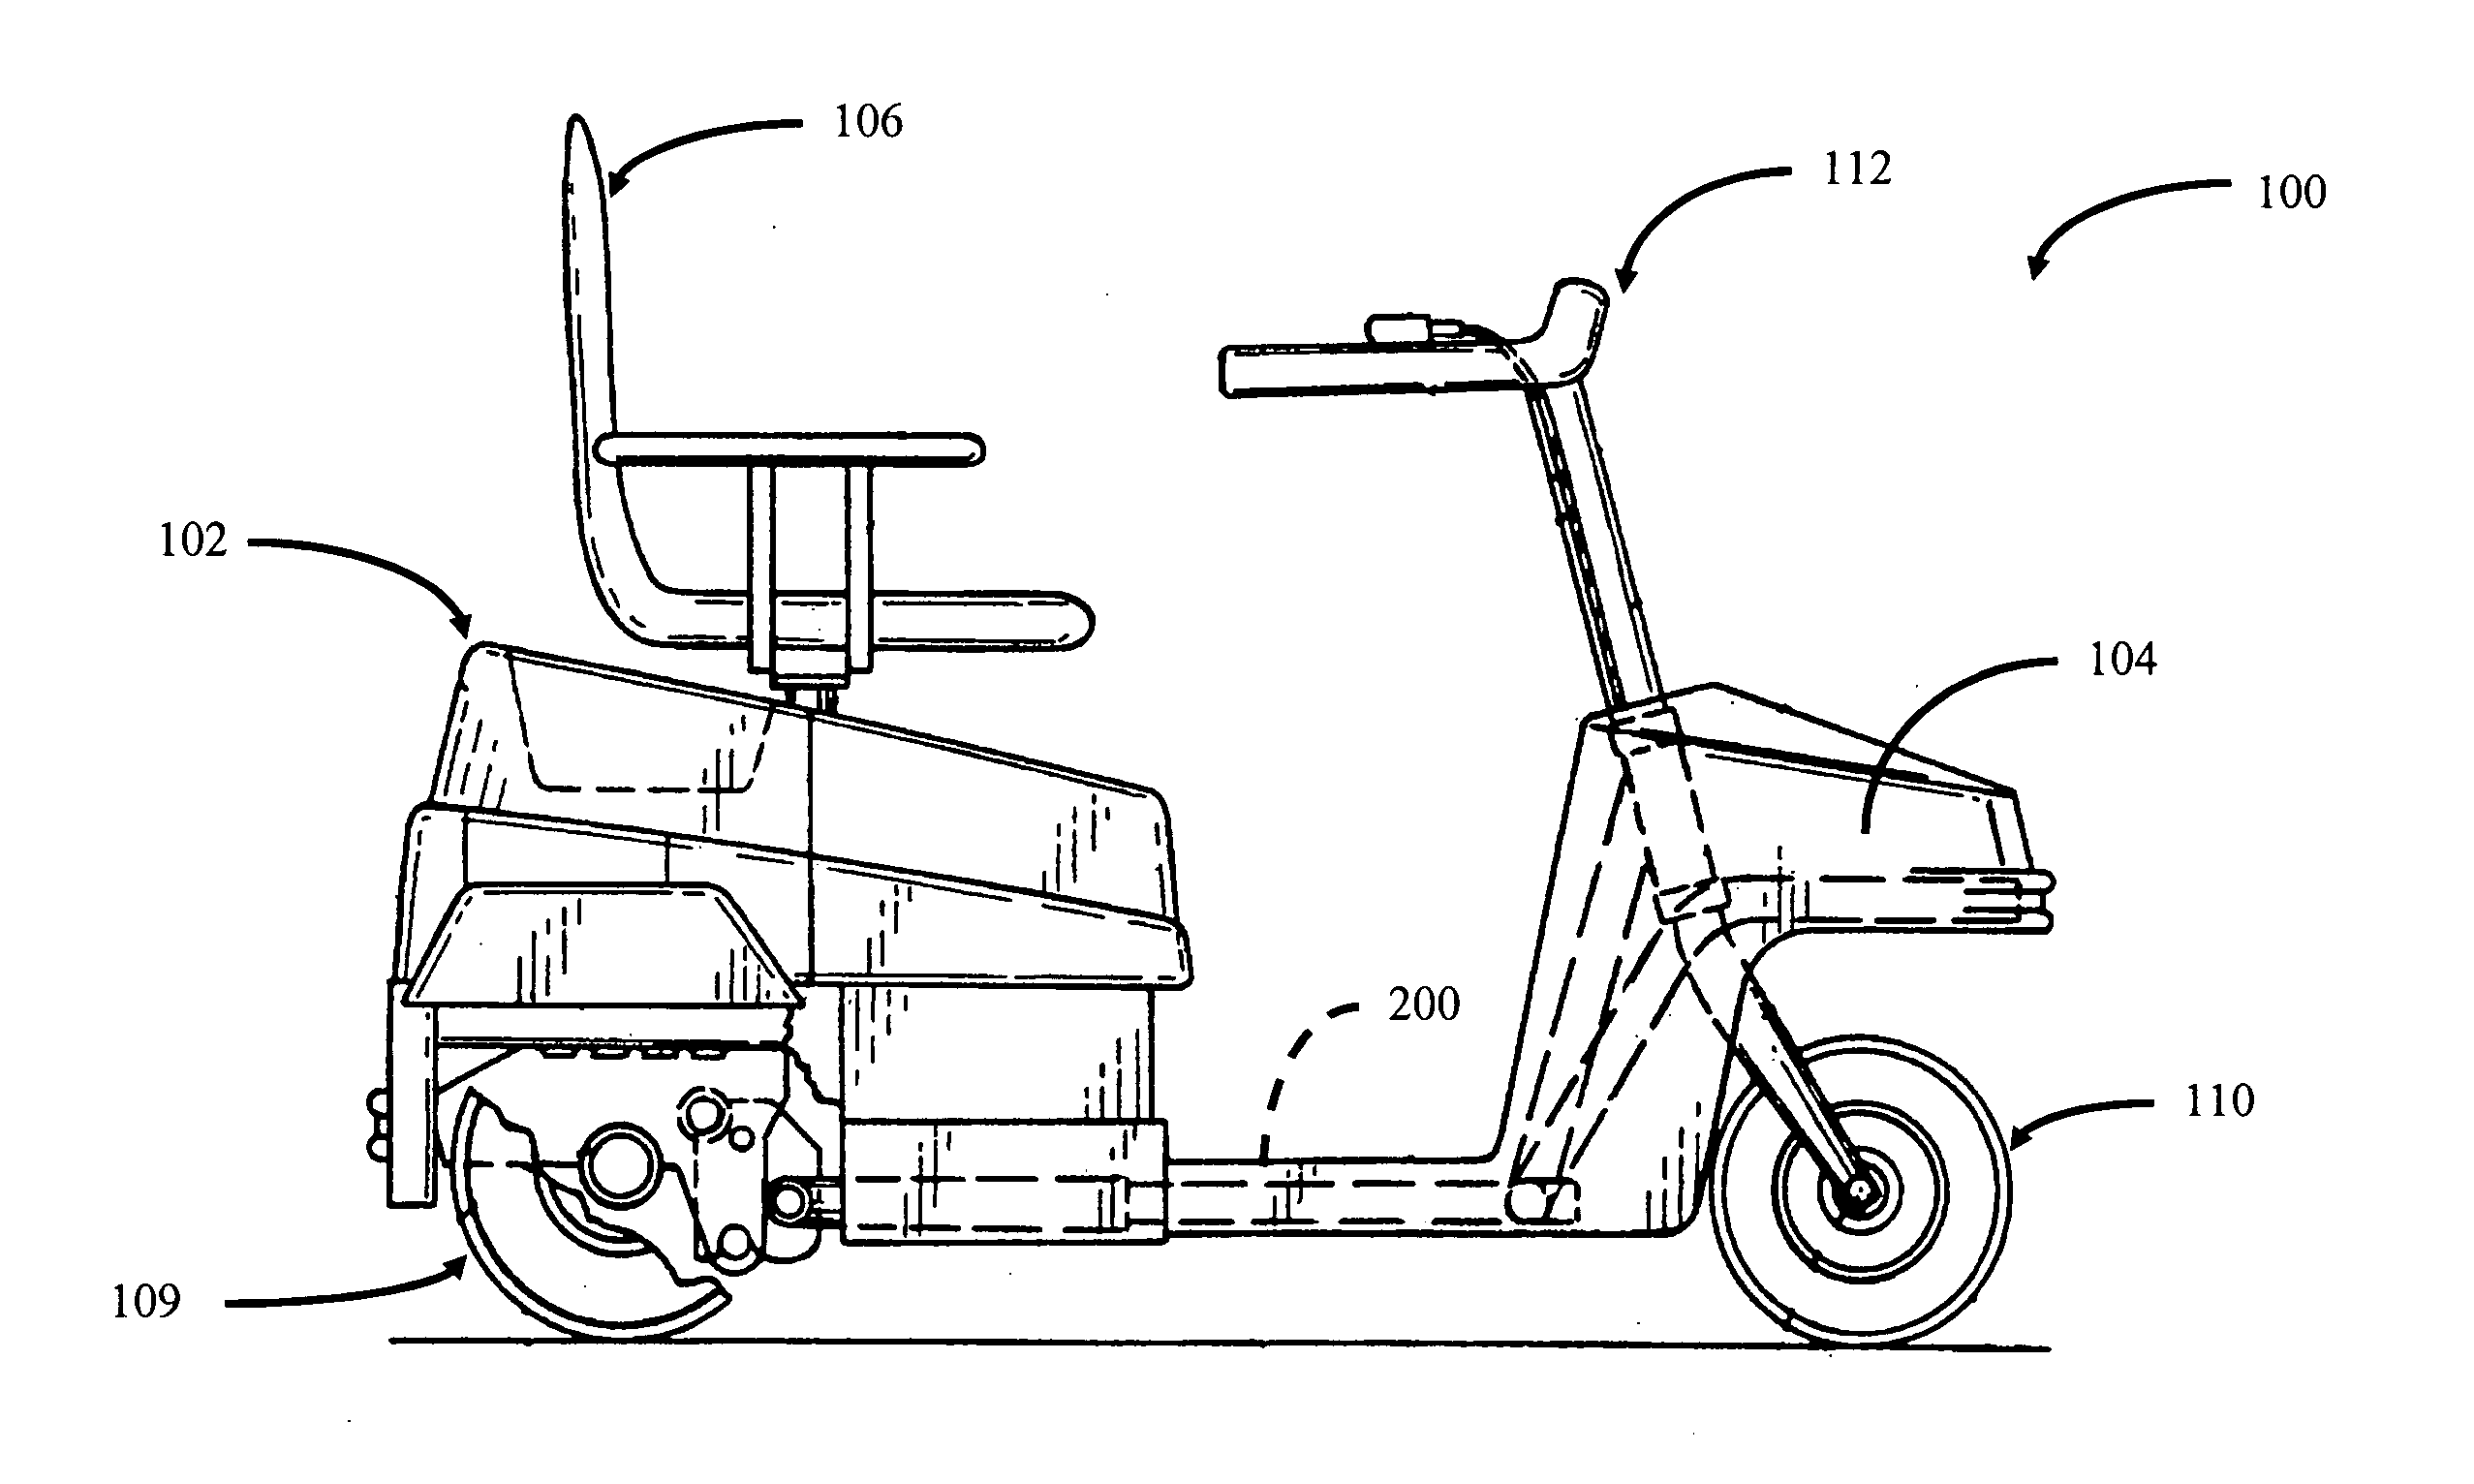 Portable mid-wheel drive scooter